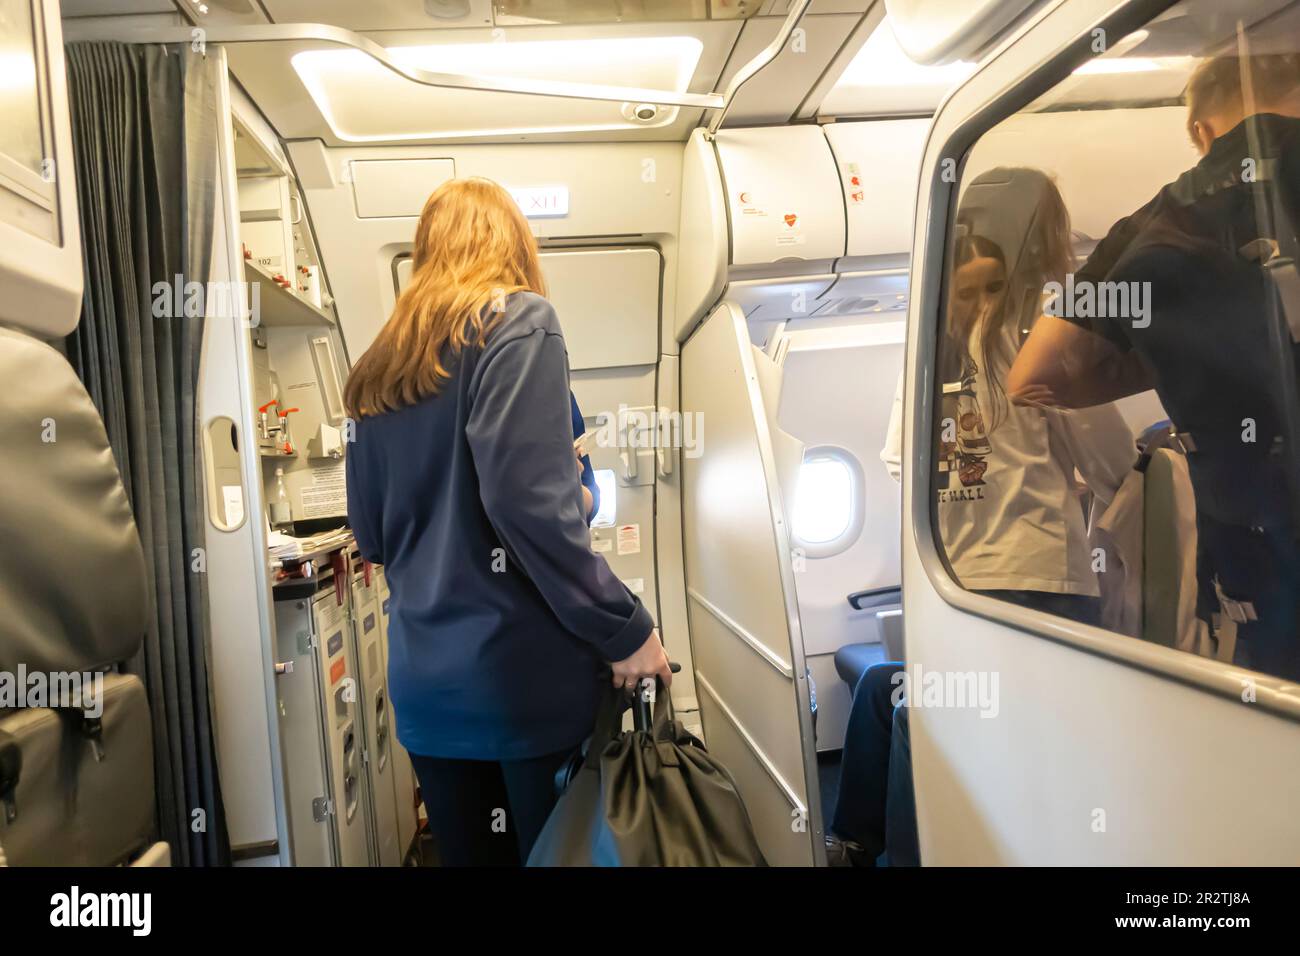 Passengers boarding Airbus A320 airplane operated by Fly Arna. back view of a female passenger entering aircraft board, through the door Stock Photo